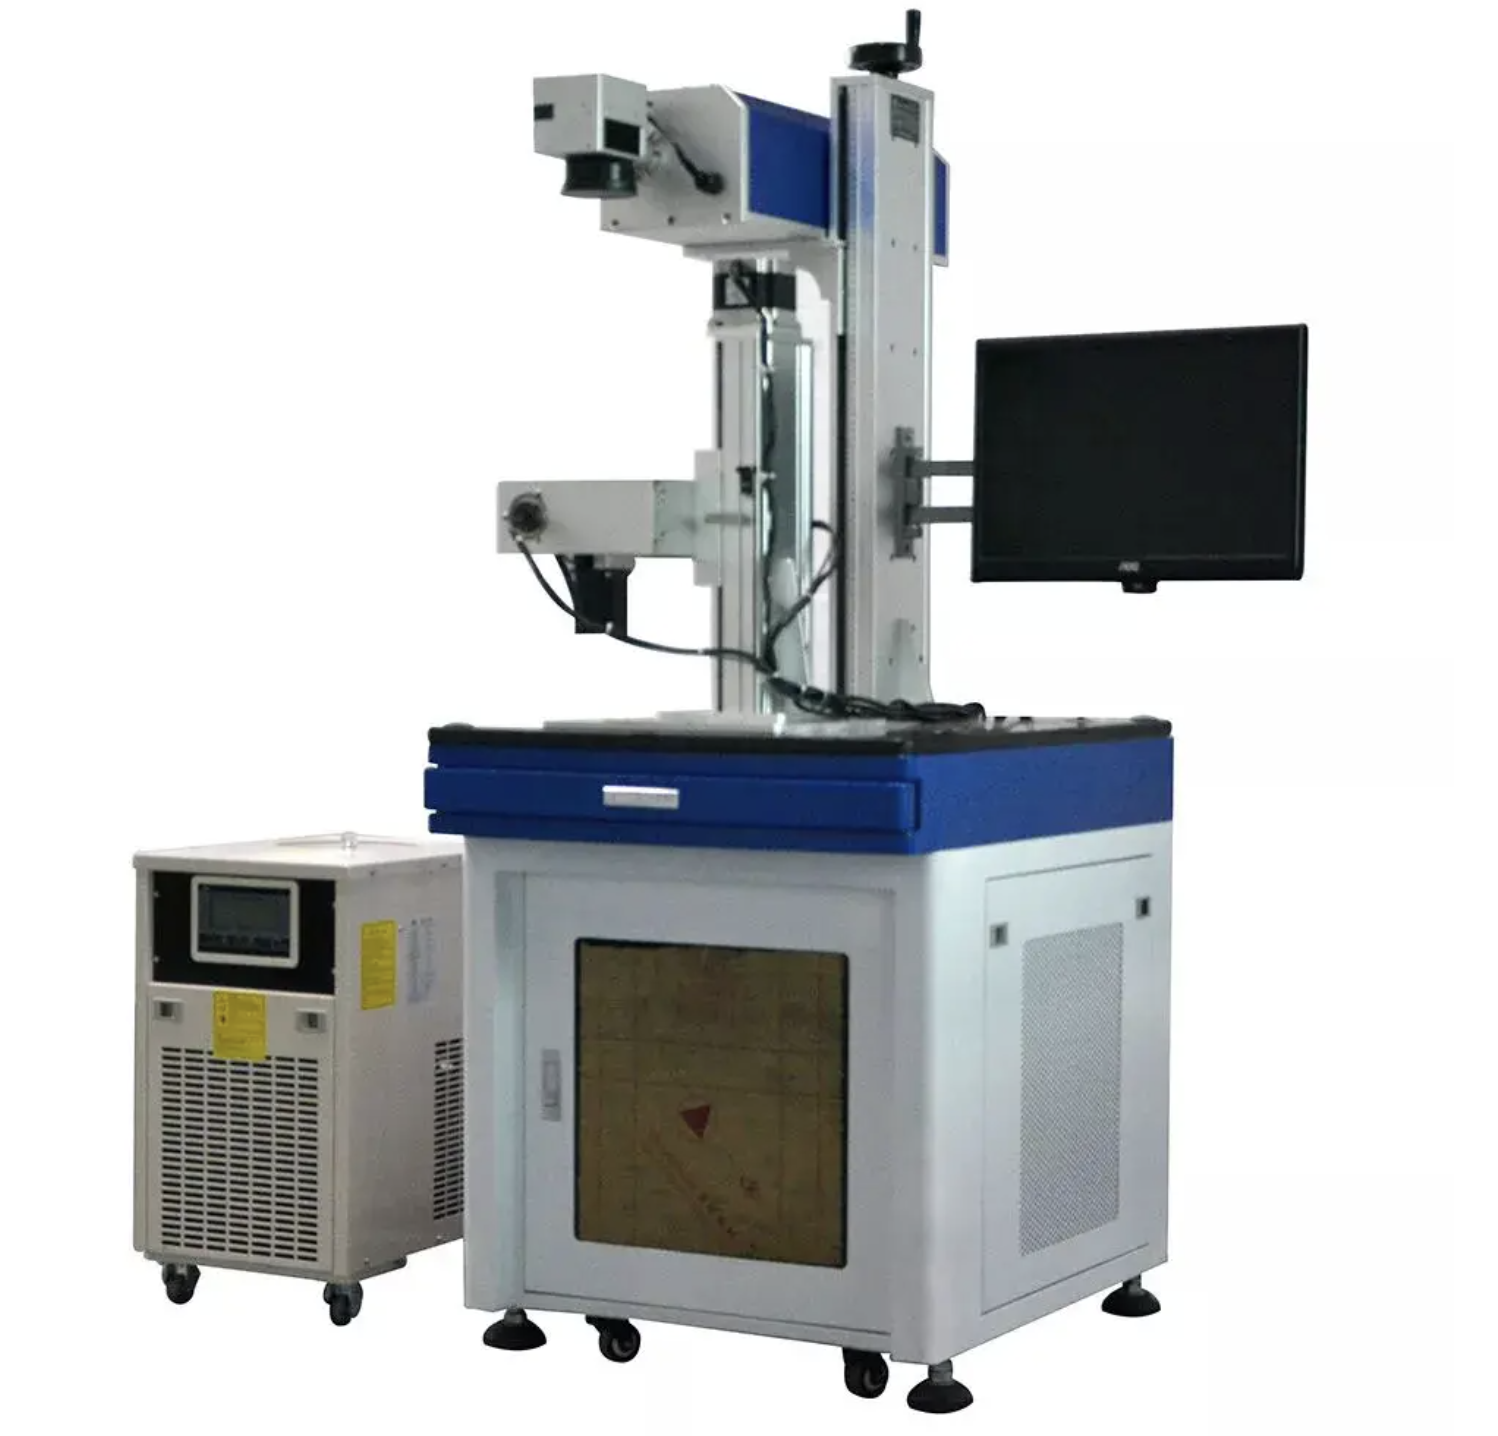 What is the Differences between uv laser marking machine and CO2 laser marking machine ?